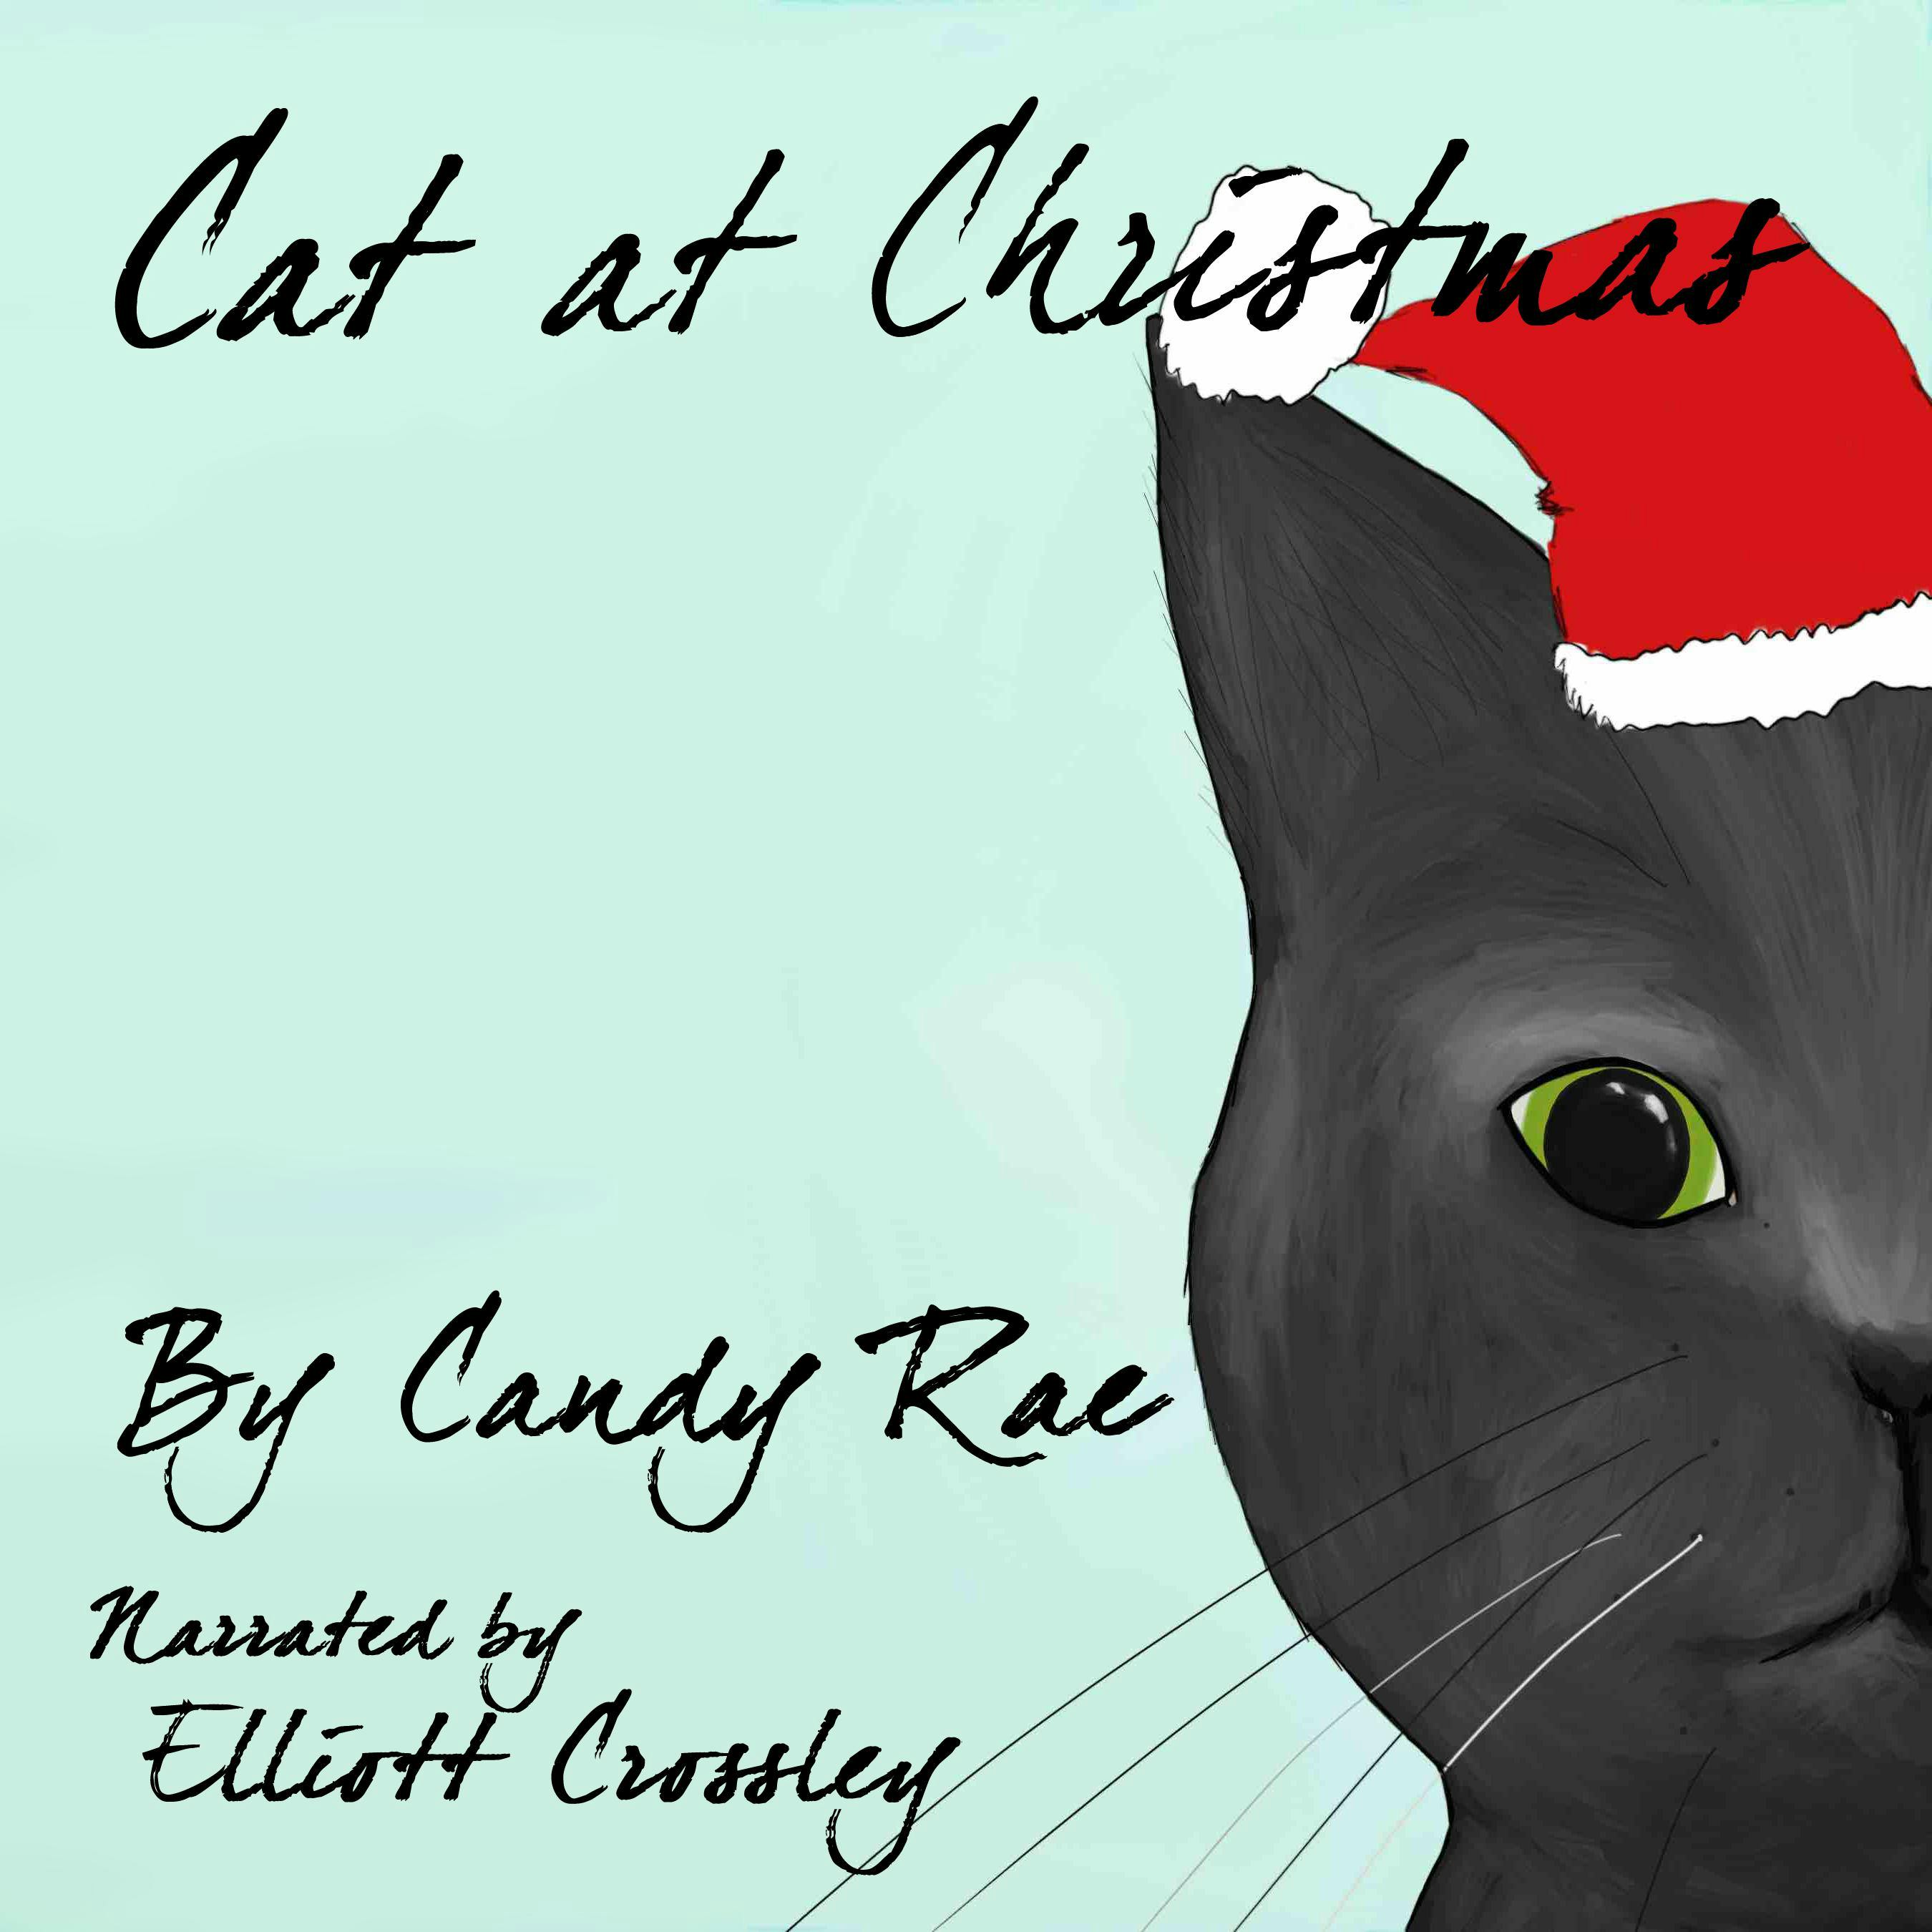 Cat at Christmas: Sammy the Cat - Candy Rae